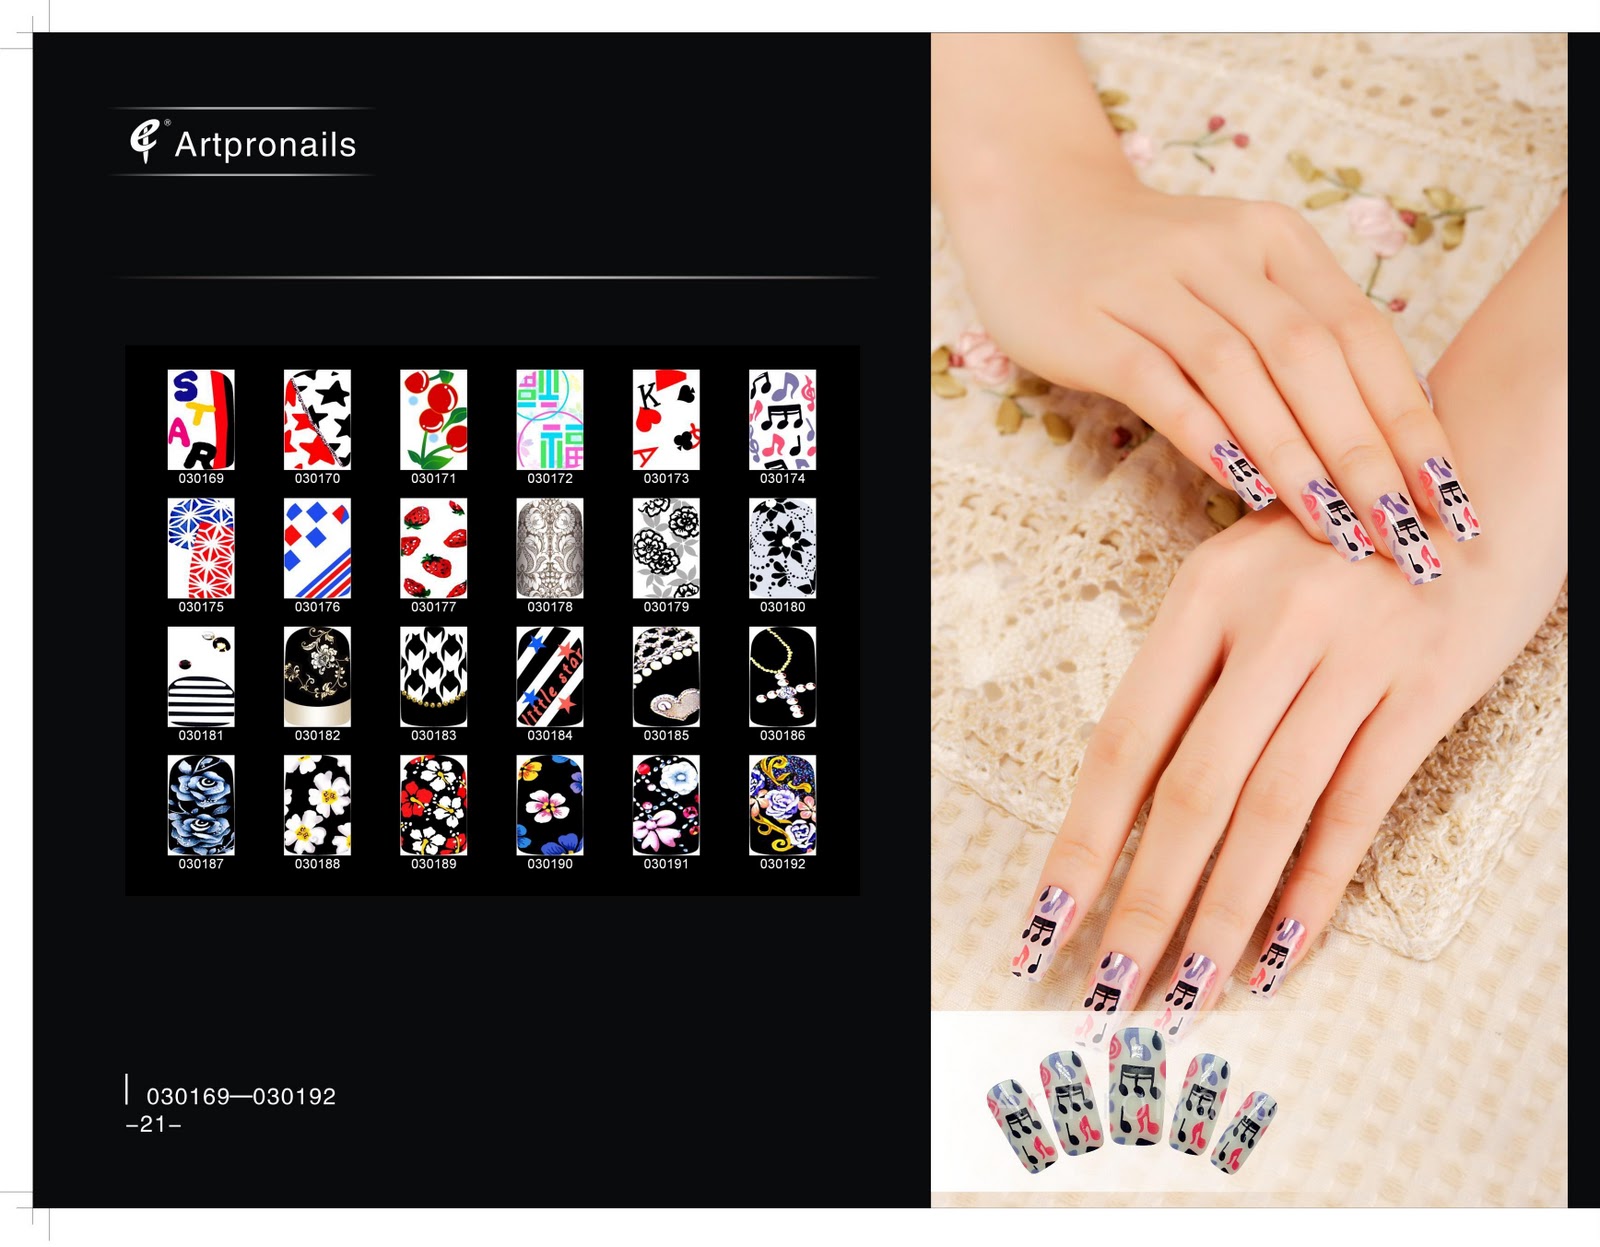 3. Nail Art Catalogs for Inspiration - wide 9